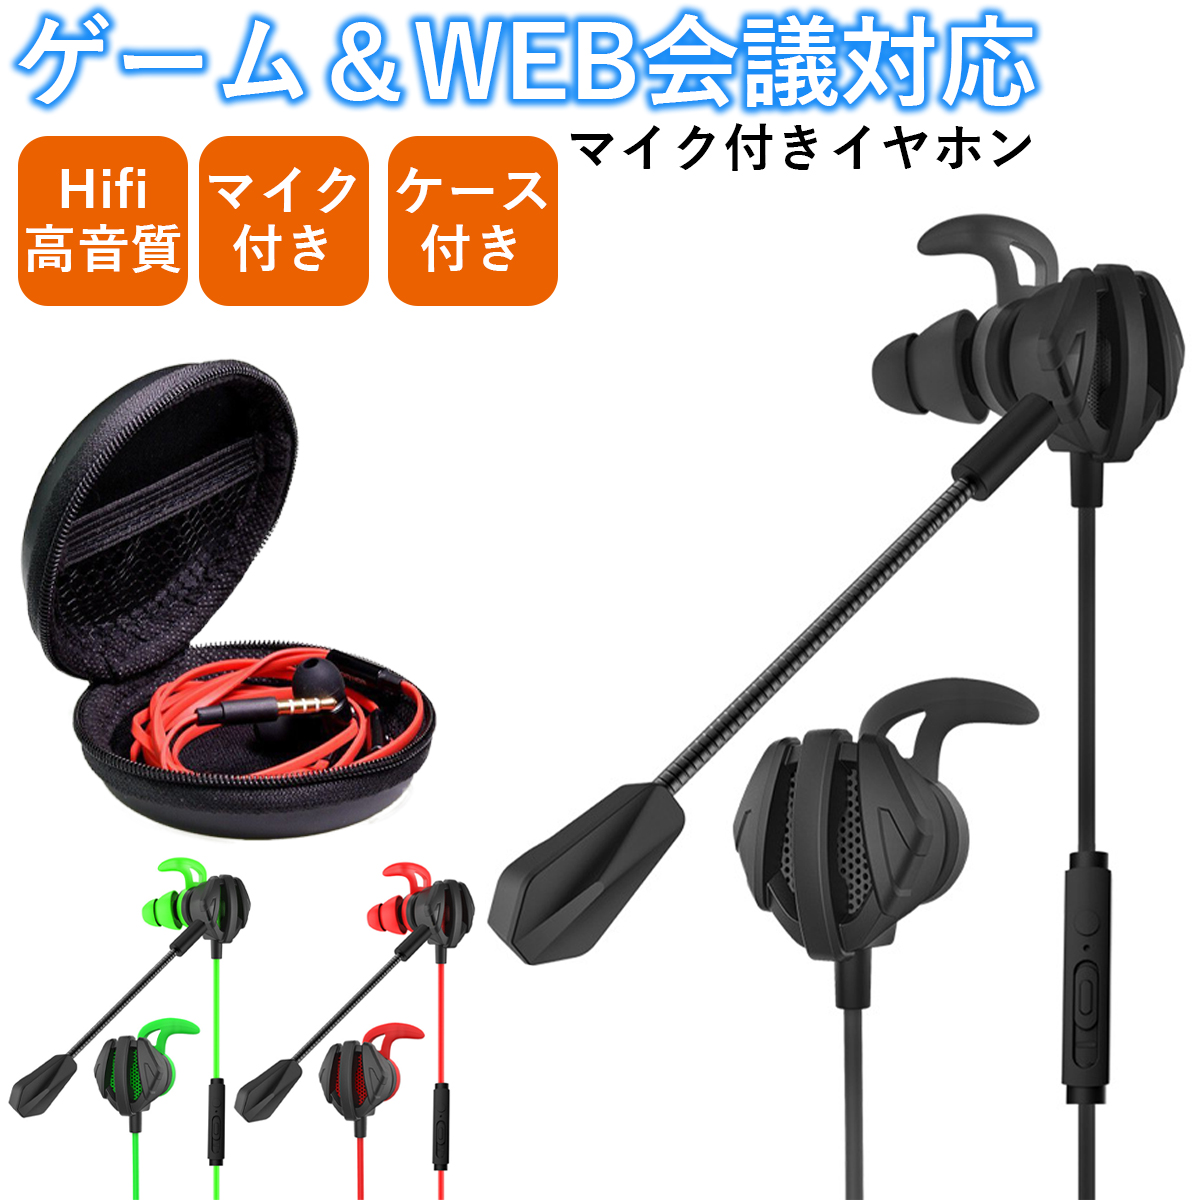  earphone mike wire web meeting mobile for children switch both ear personal computer for zoomge-mingpc ps5 ps4 in cam case attaching 